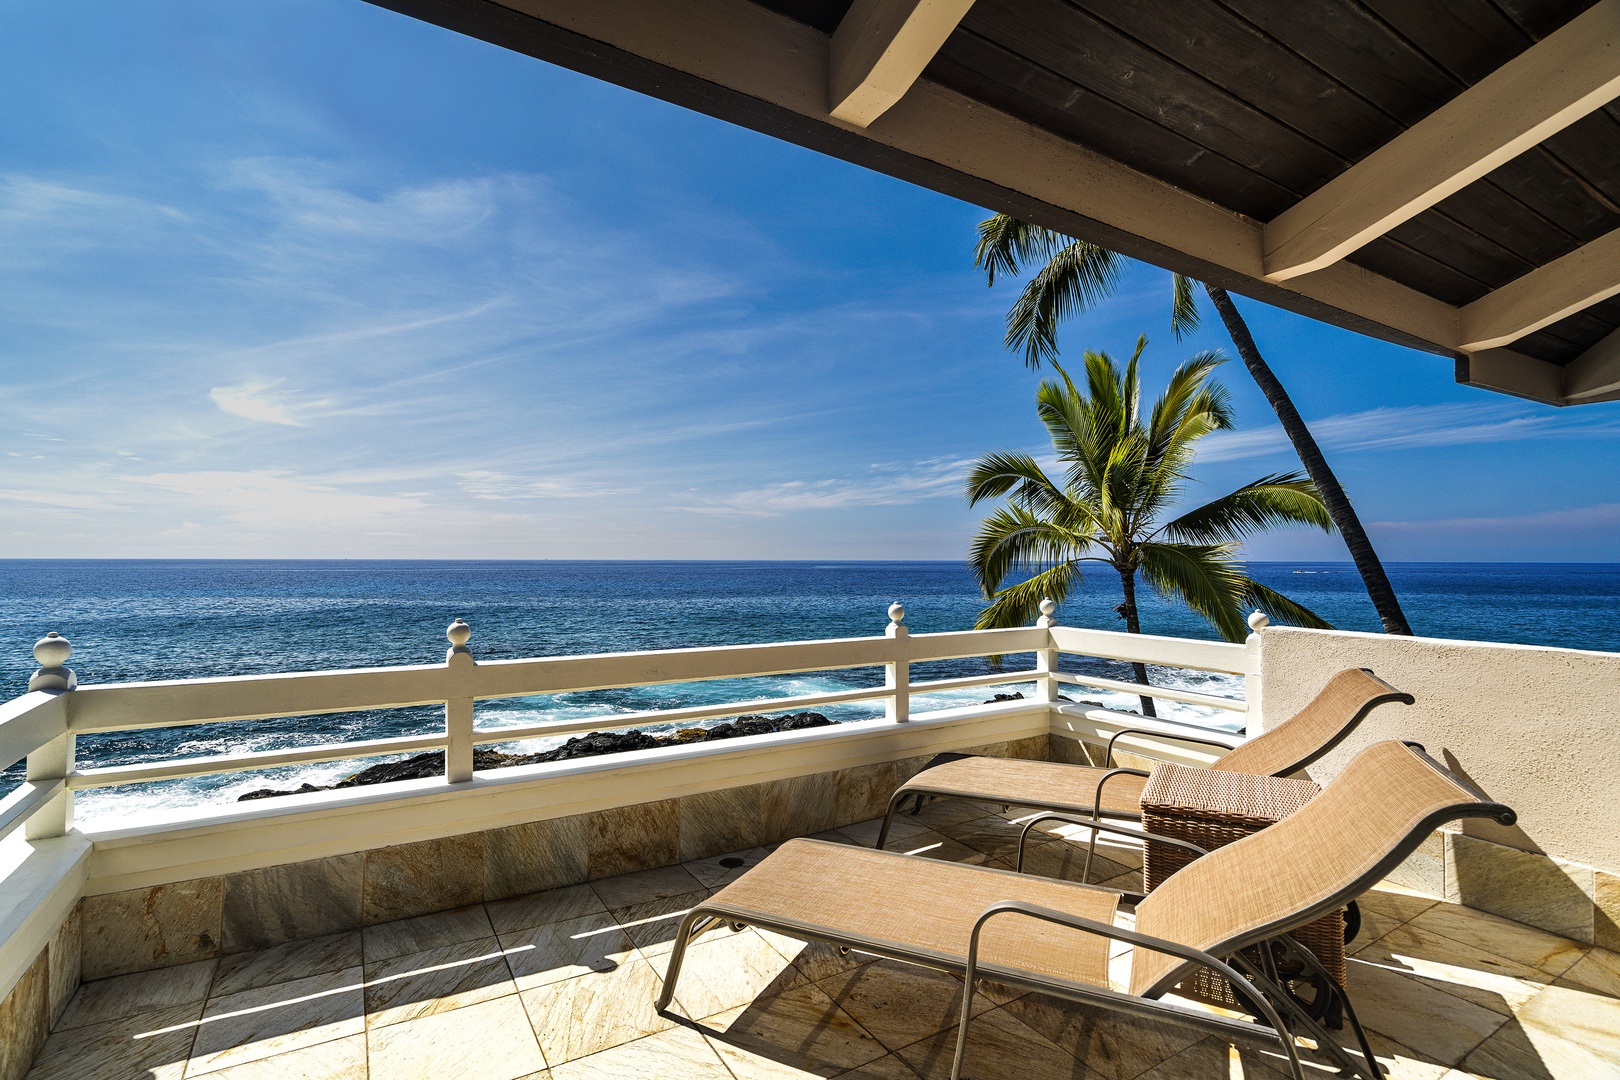 Kailua Kona Vacation Rentals, Ali'i Point #9 - Private upstairs Lanai where you can see from North to South for miles